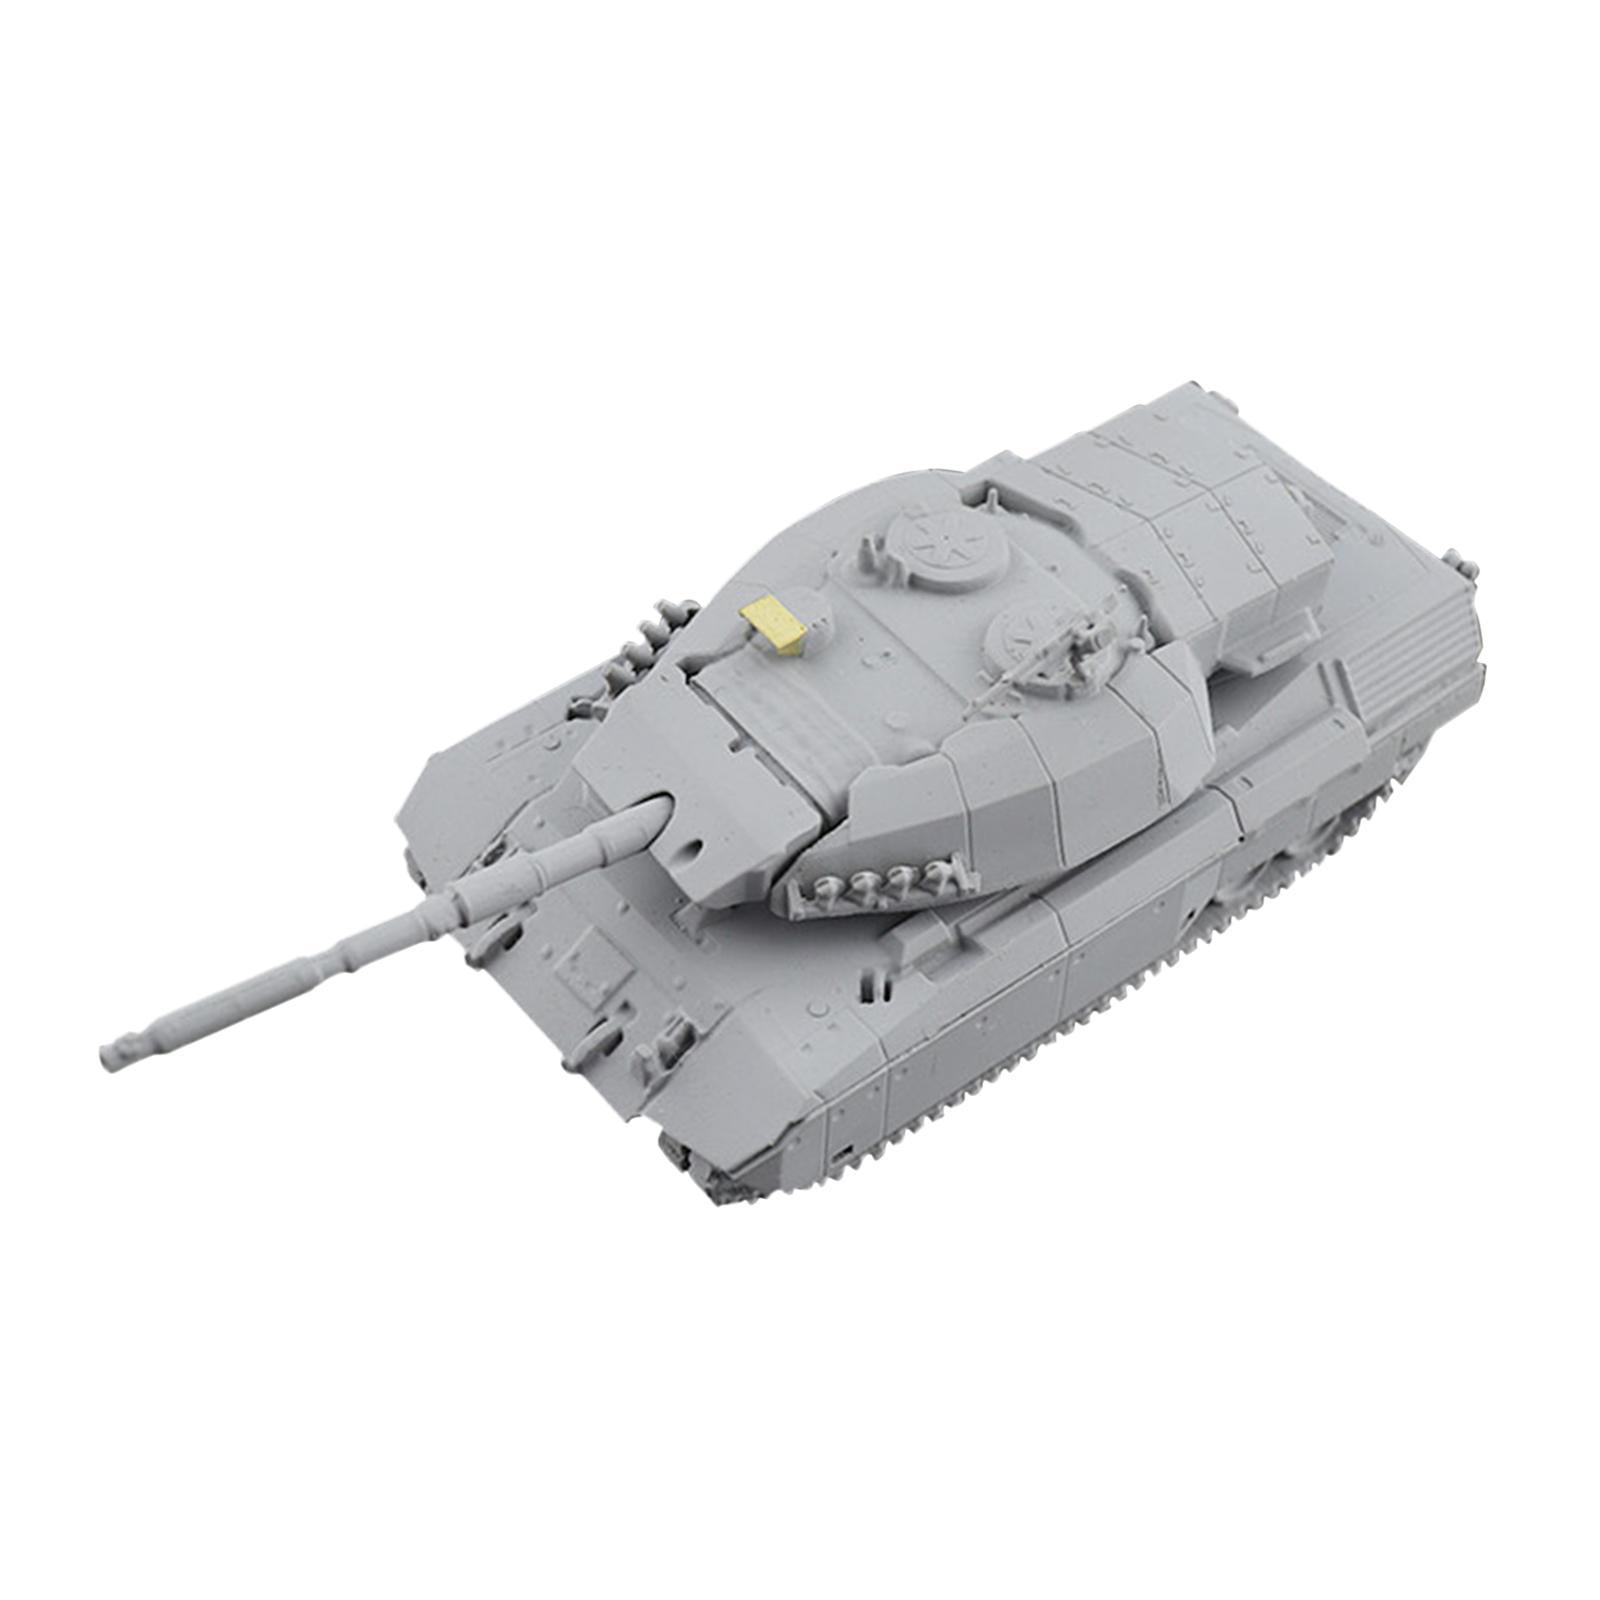 1pc 1:144 Scale Action Figure Mini Tank Model for Friends Gifts Home Decor 